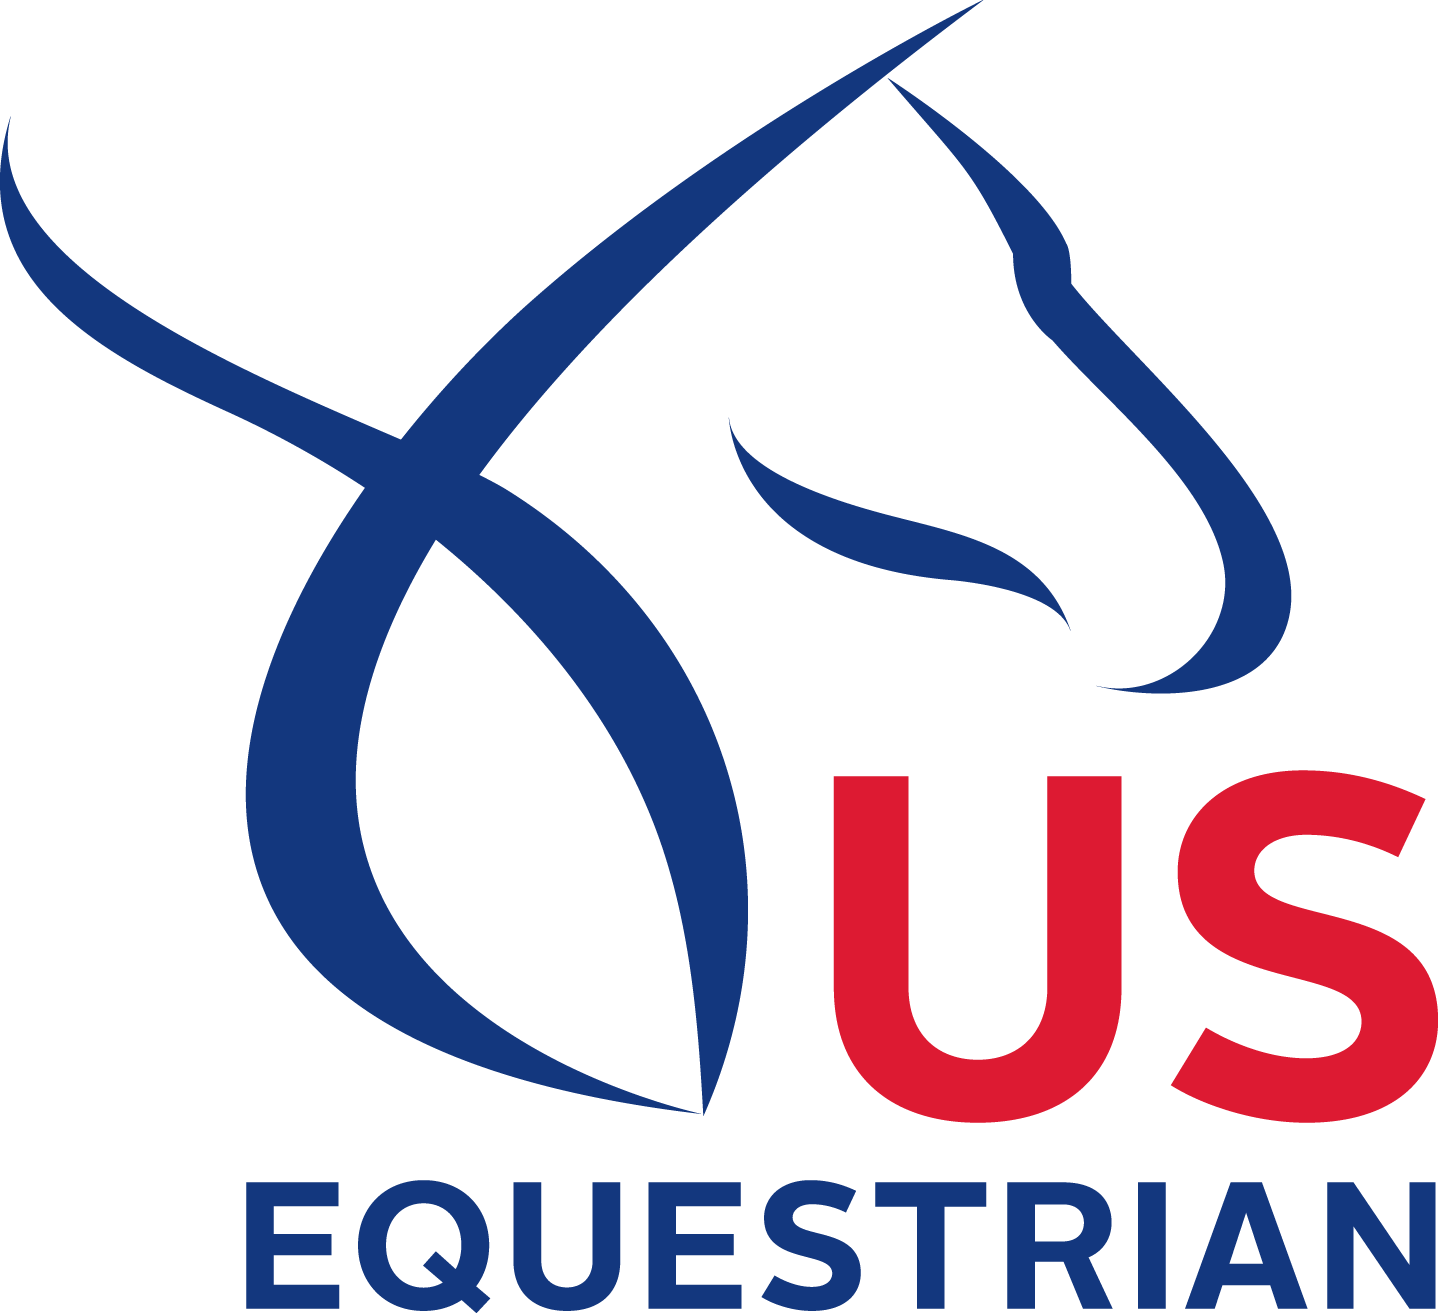 Adequan Logo - The Great Meadow International CICO3* and Nations Cup - Presented by ...